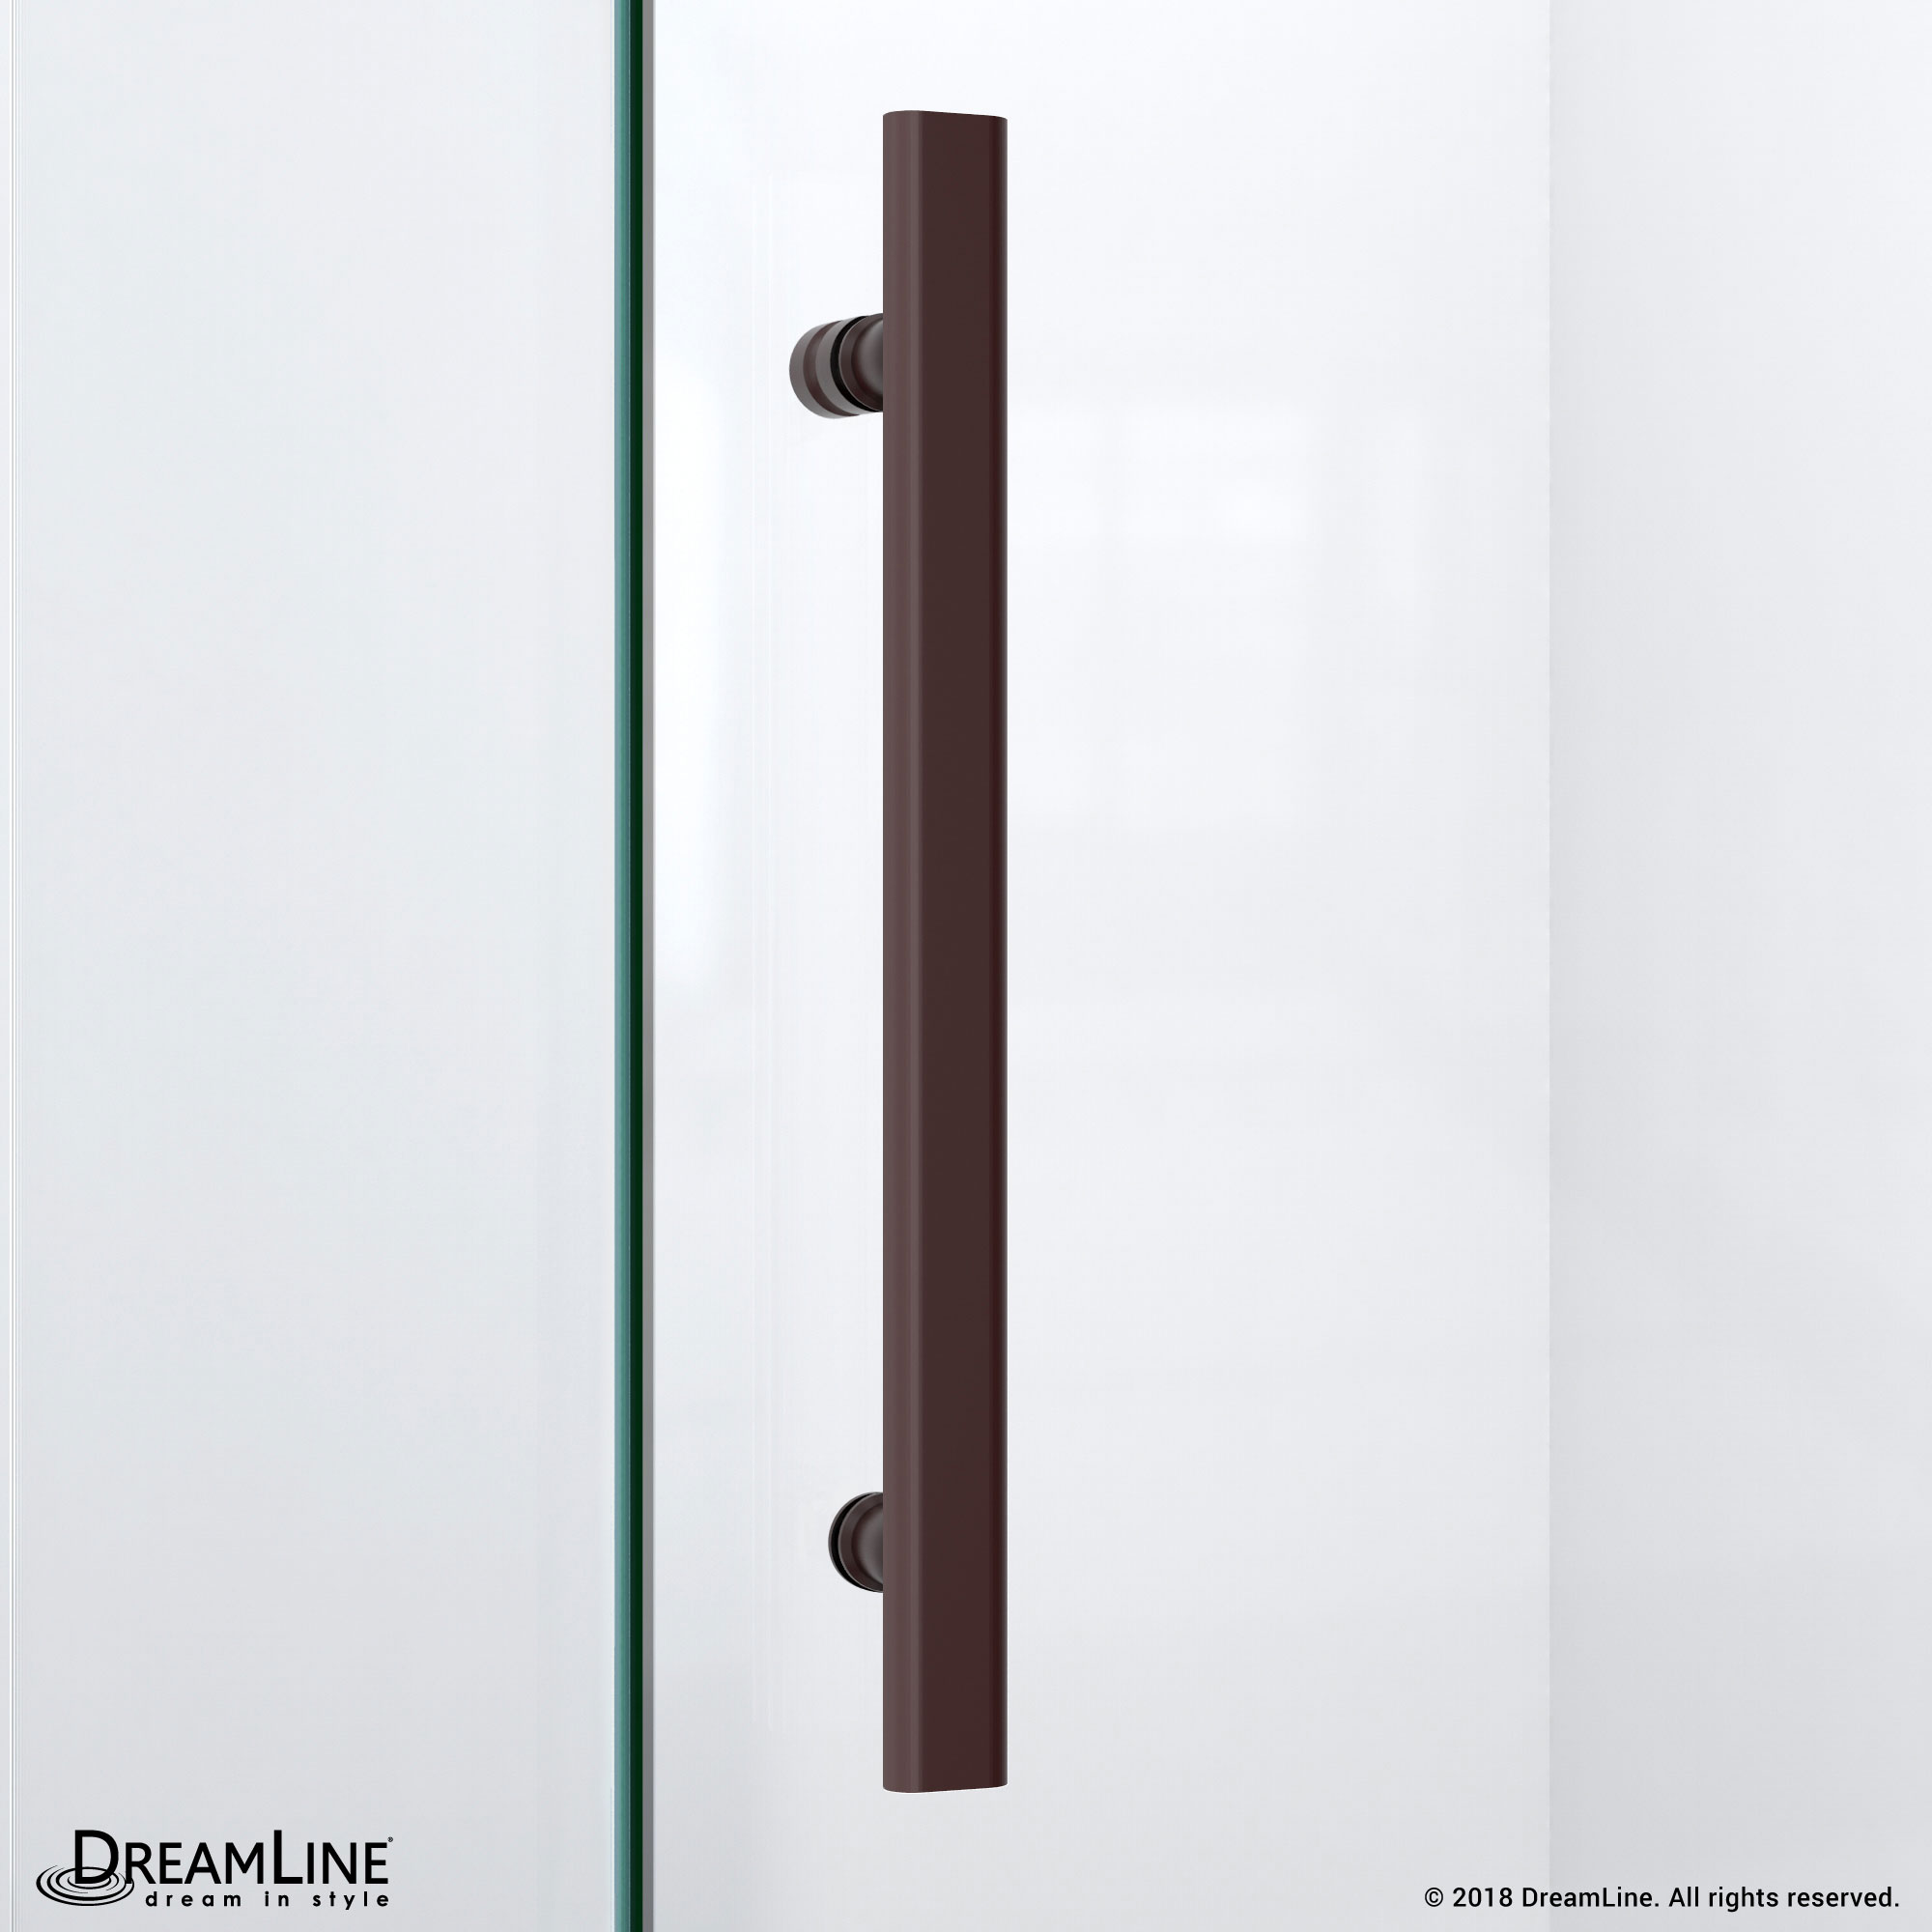 DreamLine Quatra Plus 34 in. D x 58 in. W x 72 in. H Frameless Hinged Shower Enclosure in Oil Rubbed Bronze